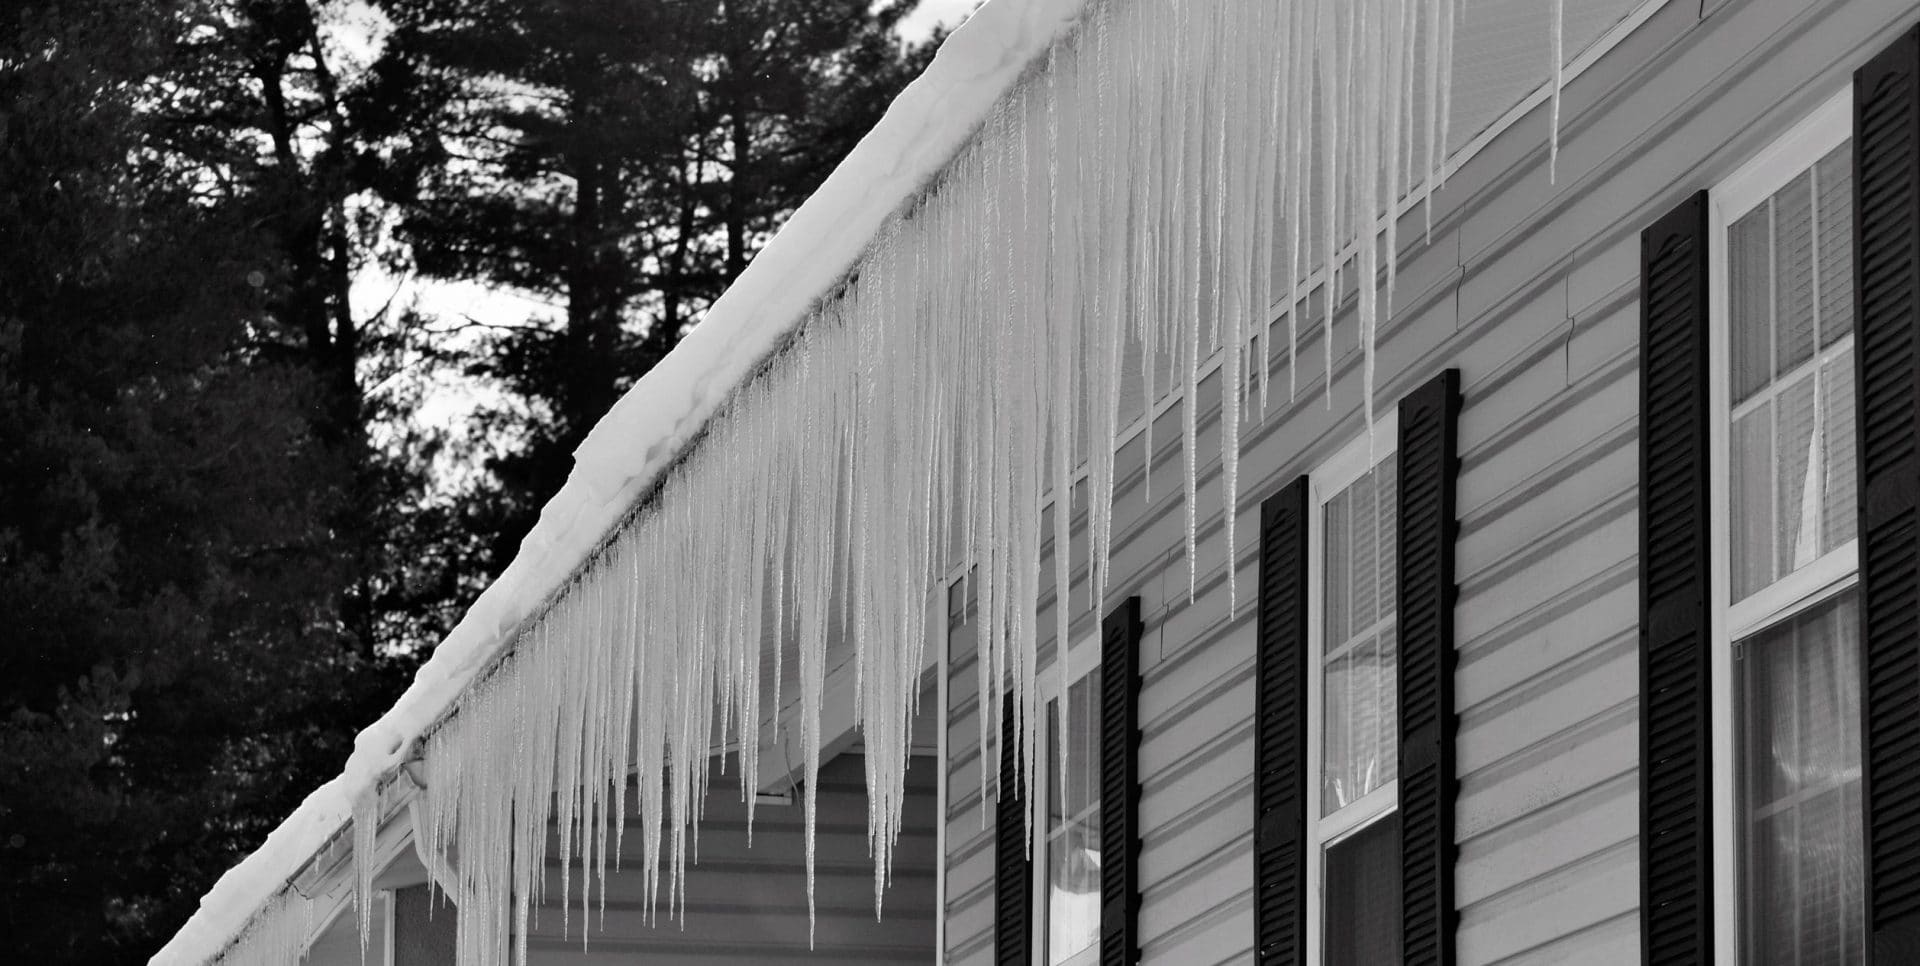 Freezing ice hazard from extreme winter storm conditions